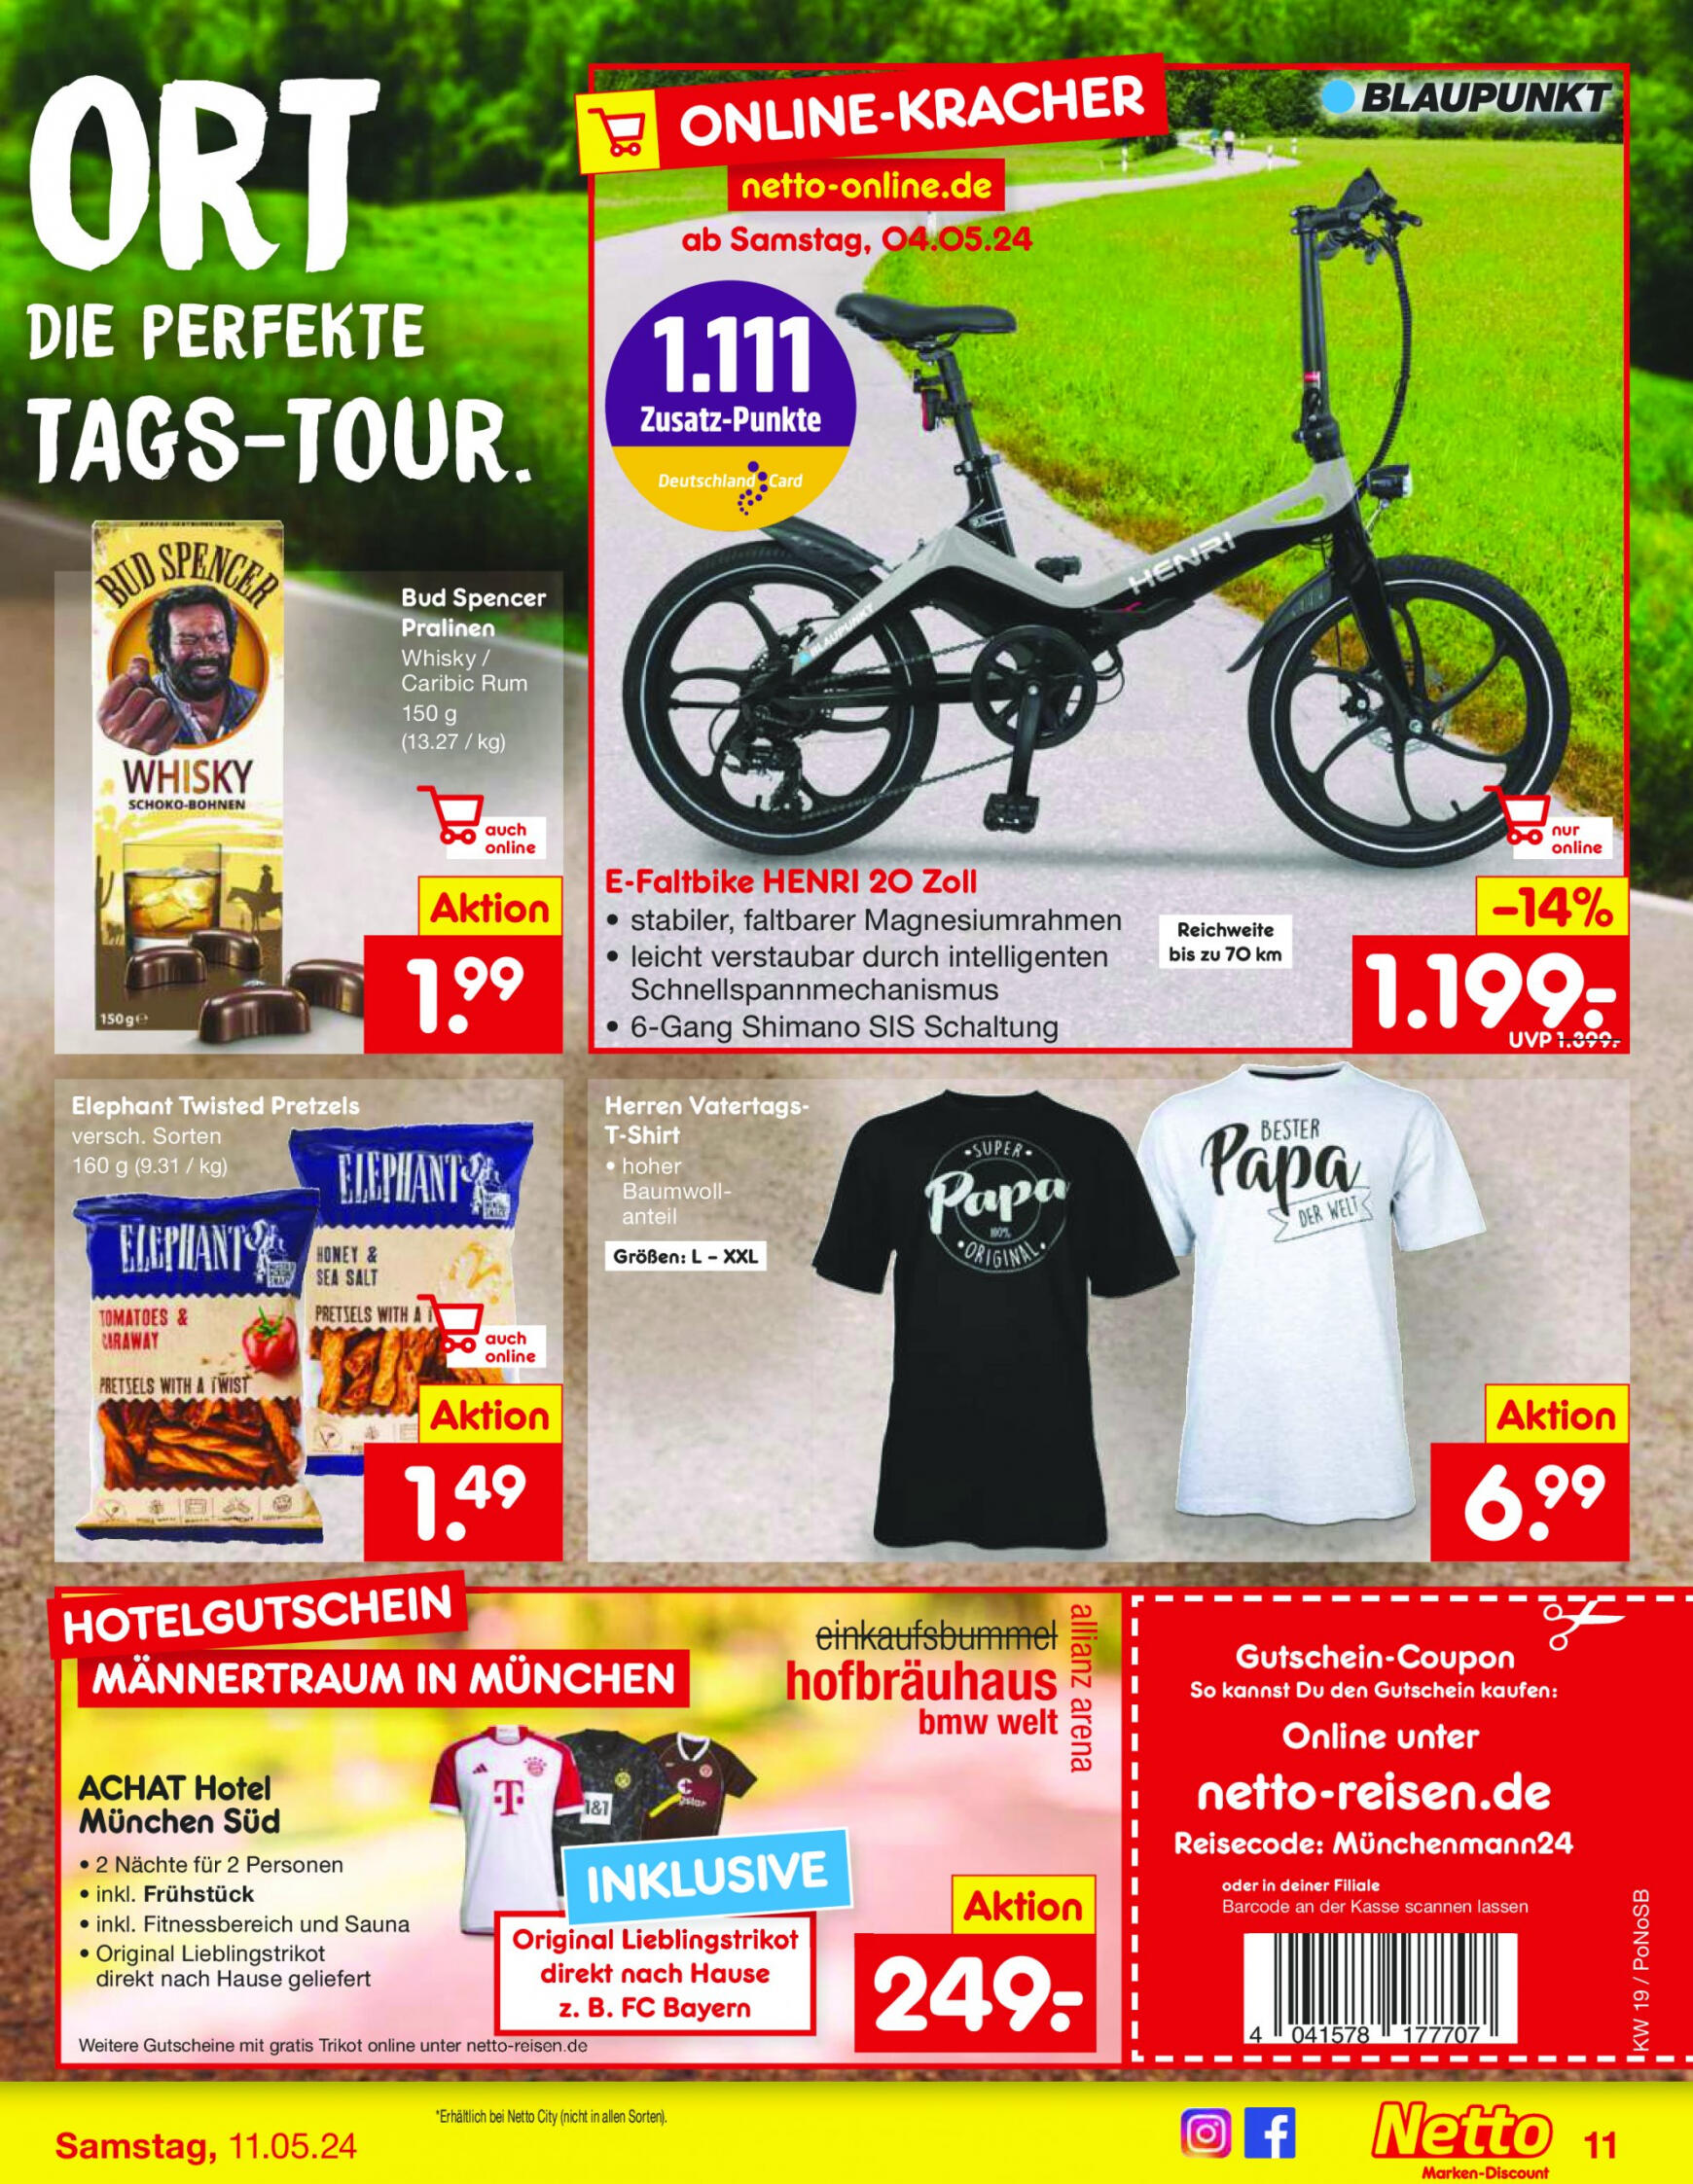 netto - Flyer Netto aktuell 06.05. - 11.05. - page: 11